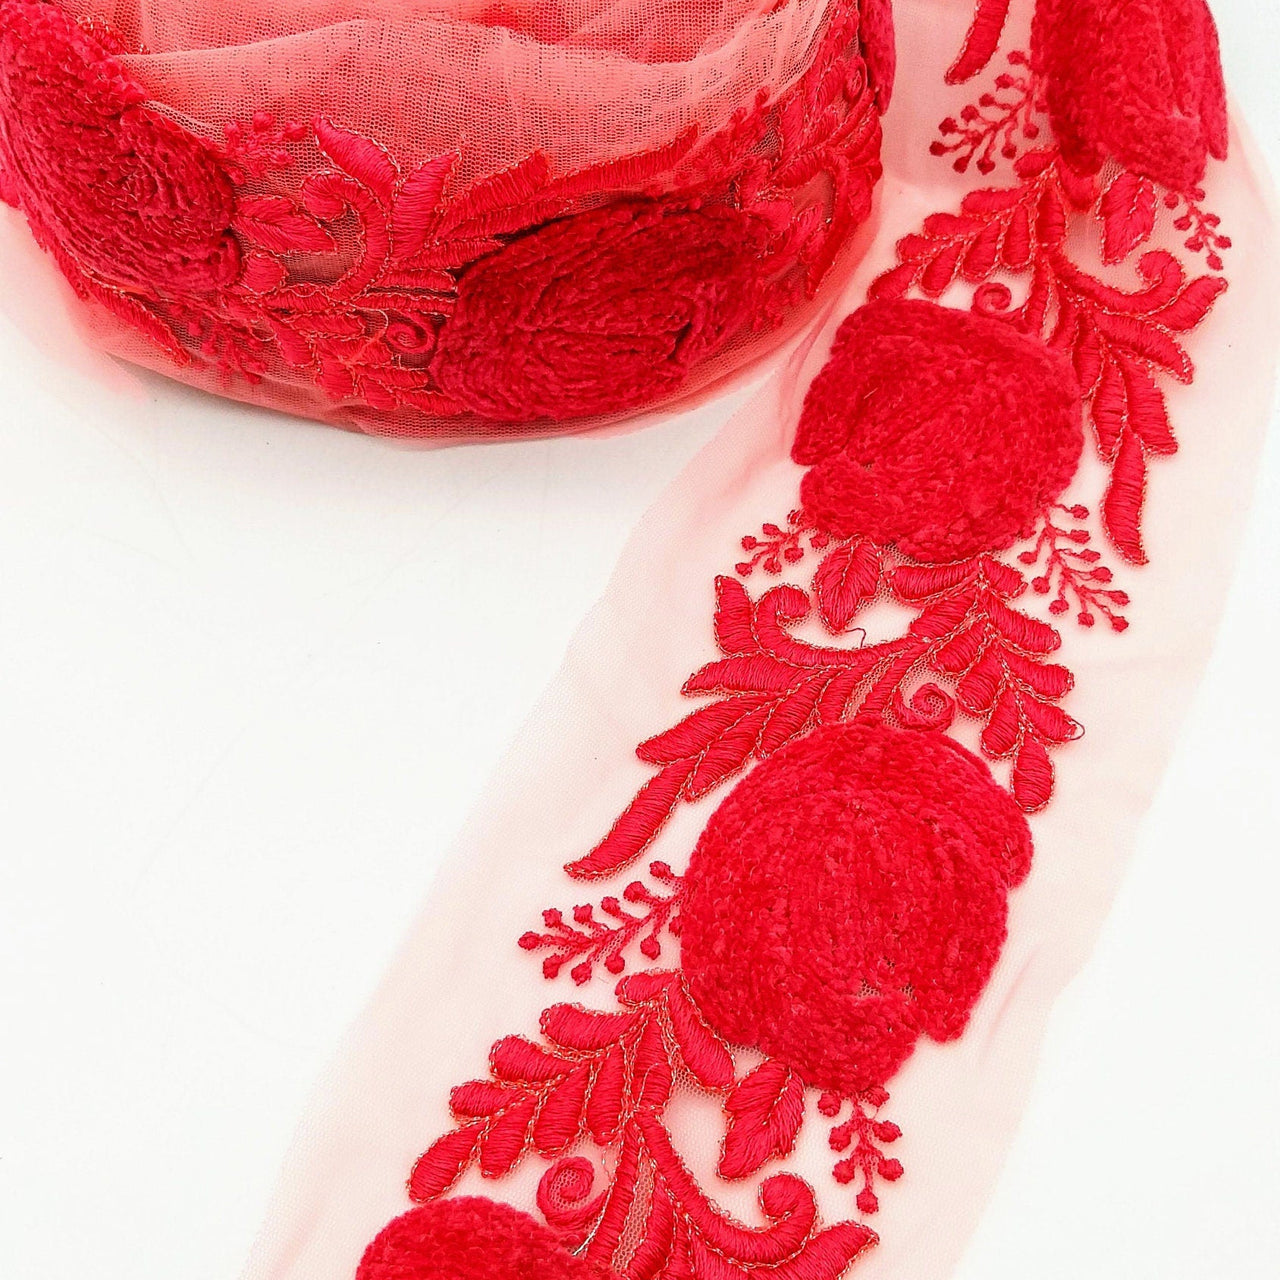 Salmon Pink Soft Net Fabric Lace Trim with Floral Embroidery, Lace Trim, Sari Border